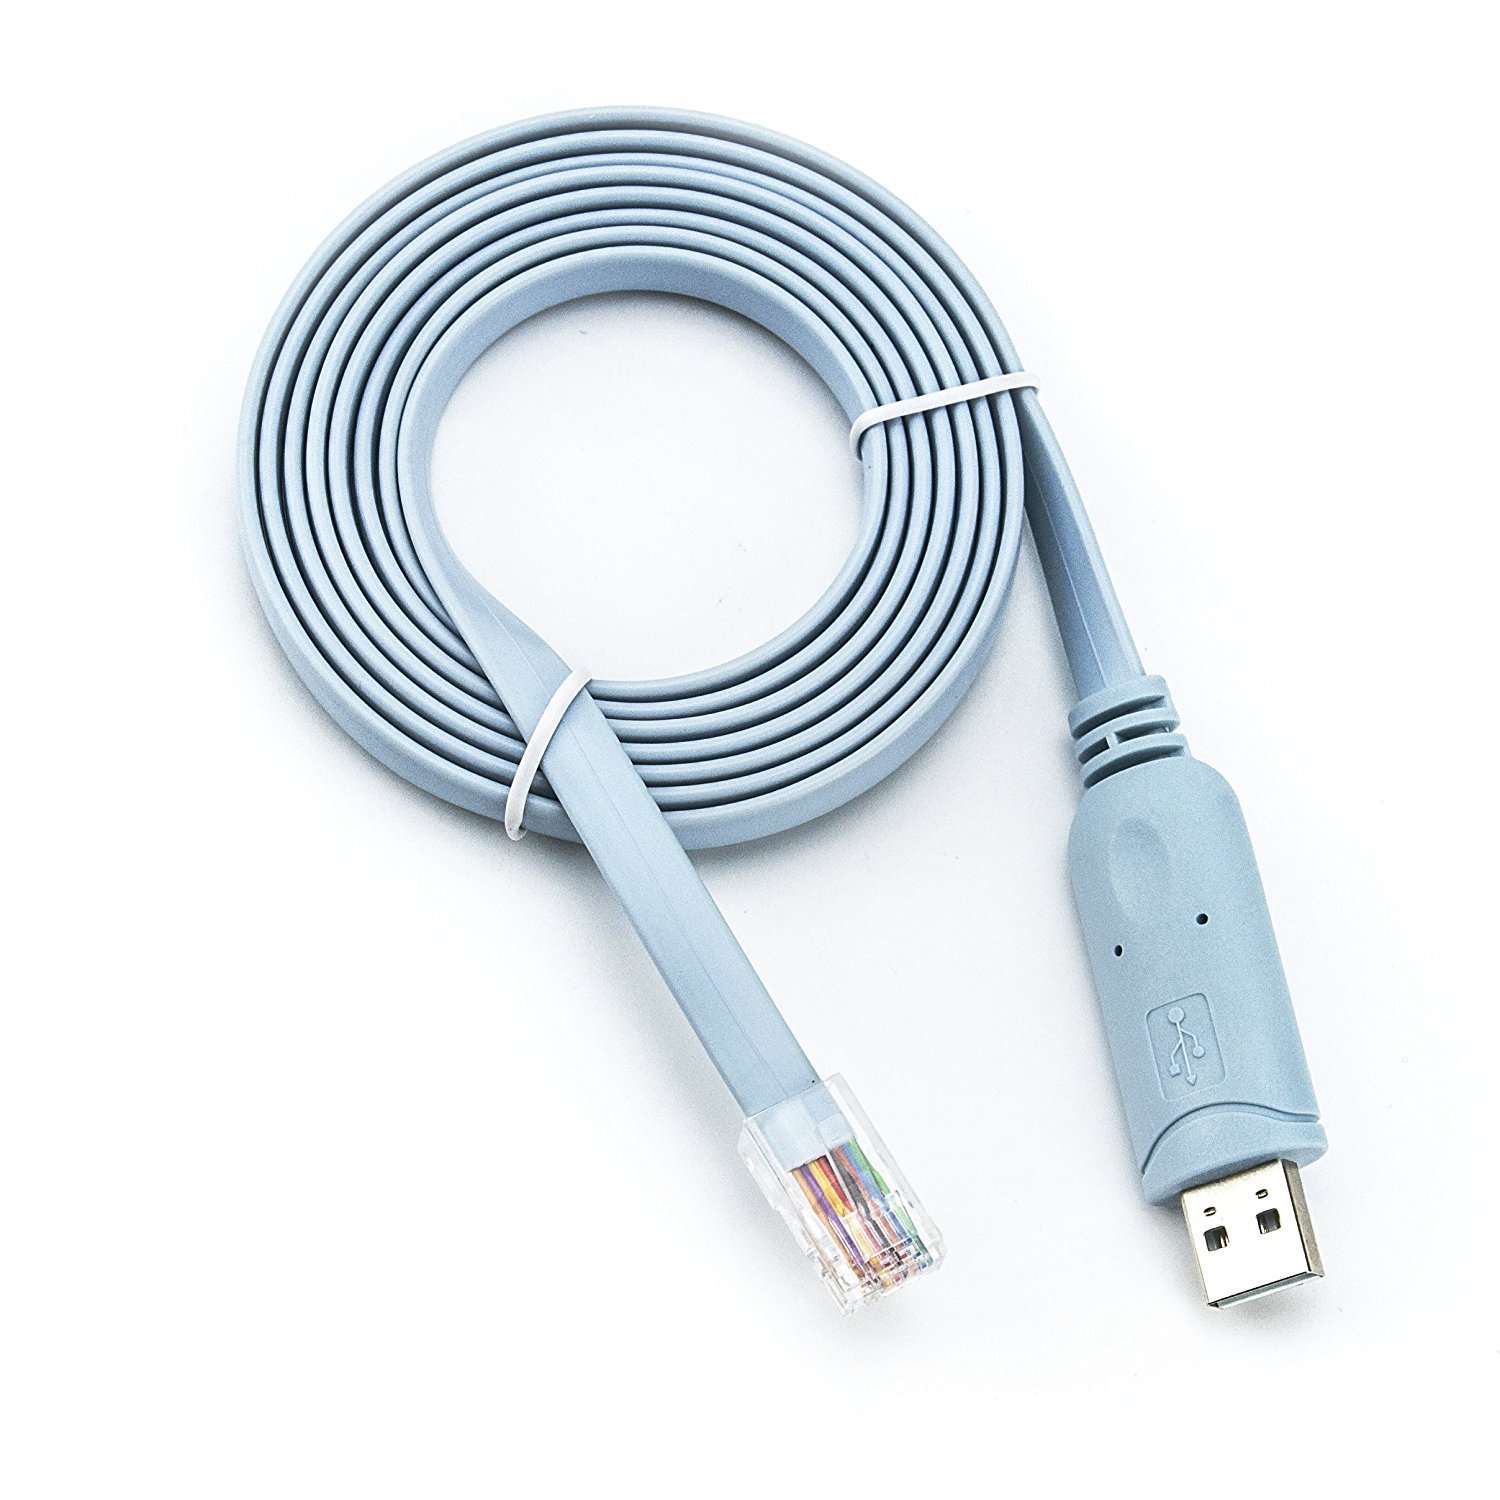 6" FTDI FT232R chip / USB to RJ45 Console Cable